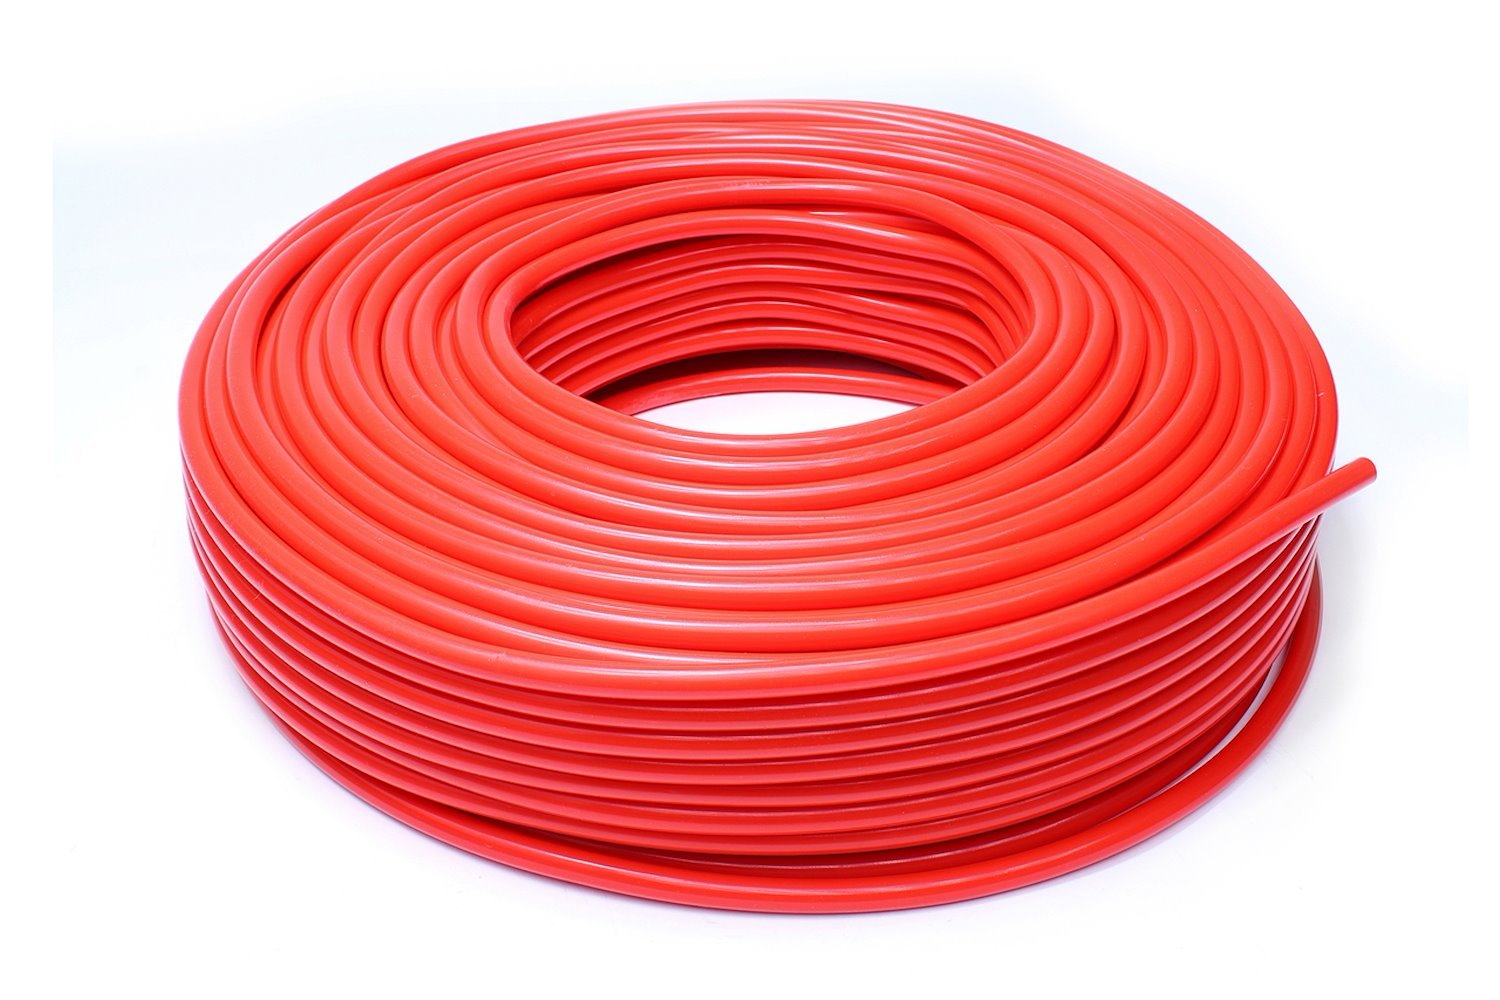 HTSVH6-REDx50 High-Temperature Silicone Vacuum Hose Tubing, 1/4 in. ID, 50 ft. Roll, Red